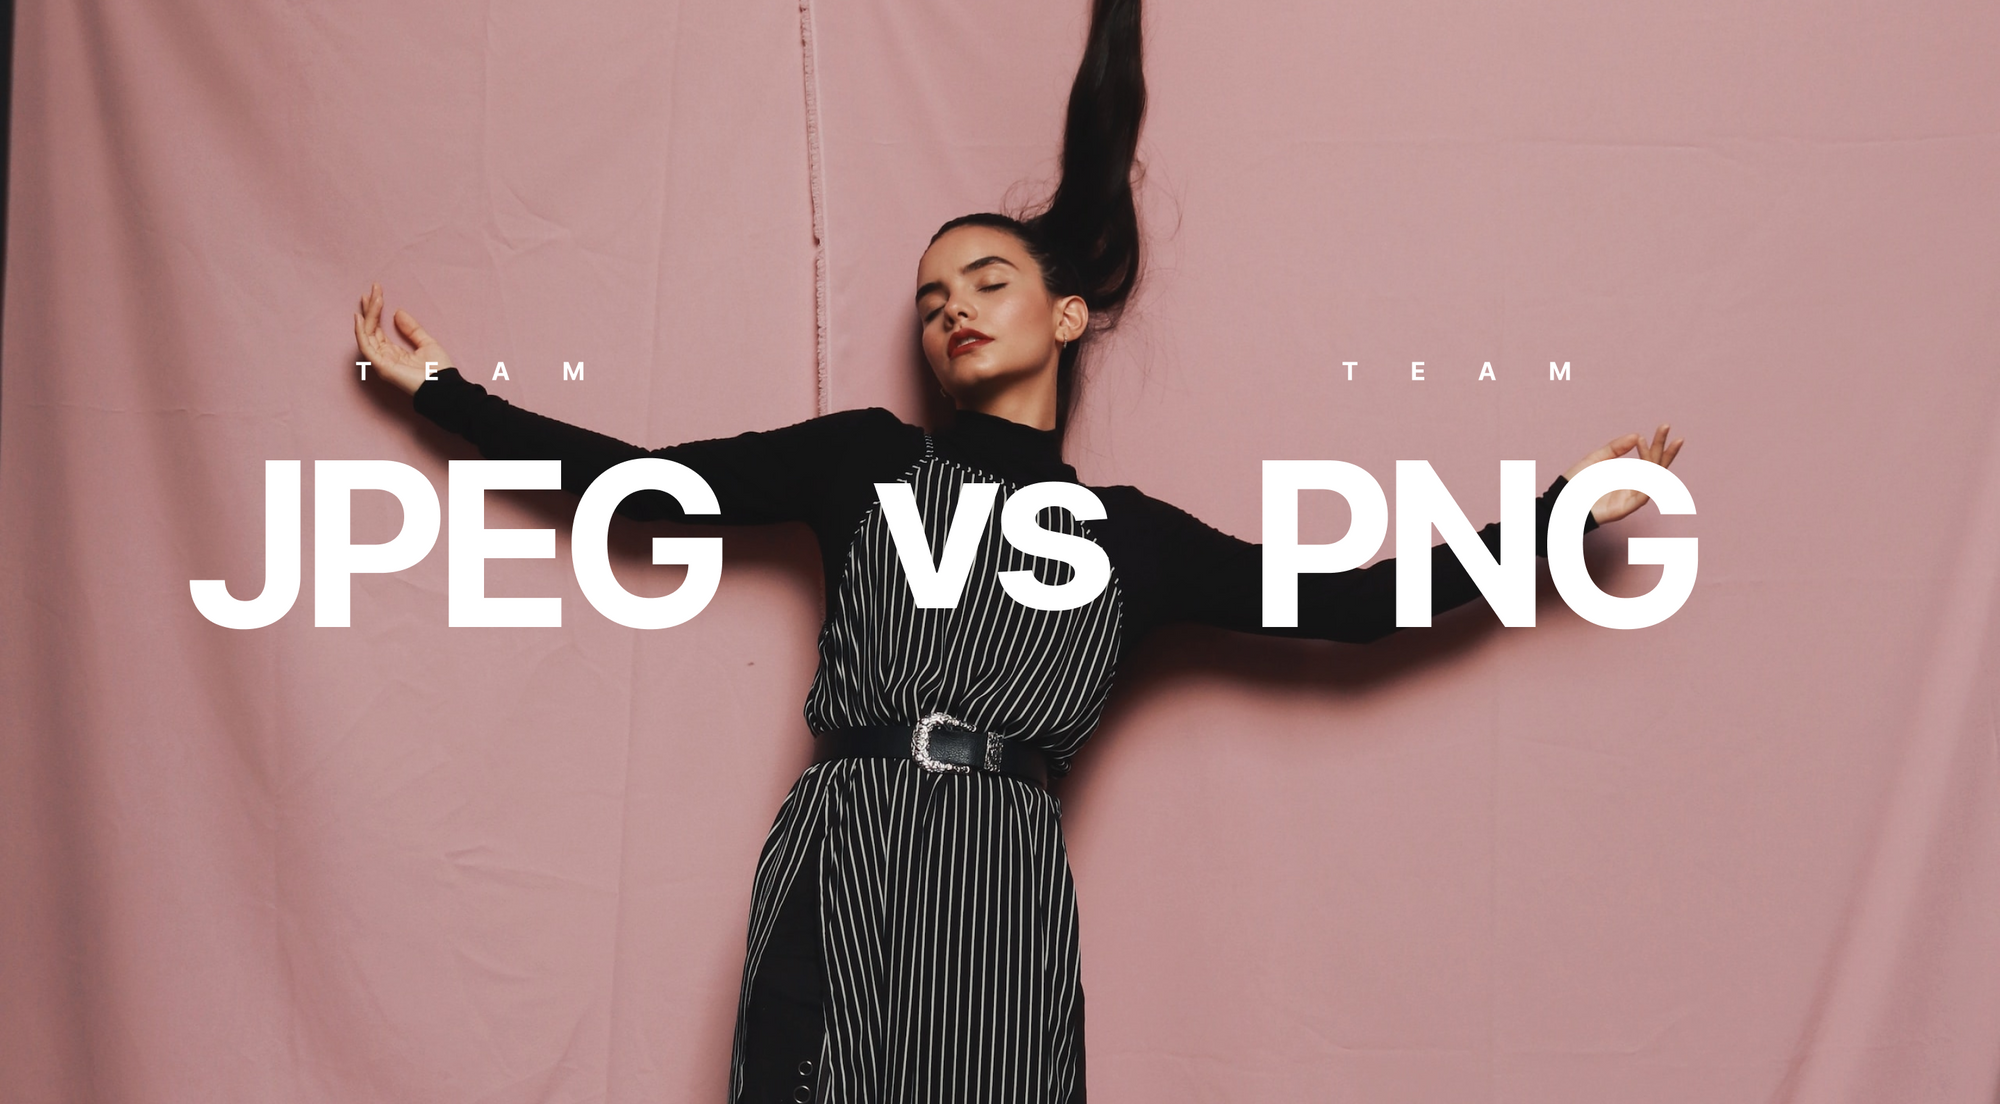 JPEG or PNG: the Pros and Cons of Each Format and When to Use Them